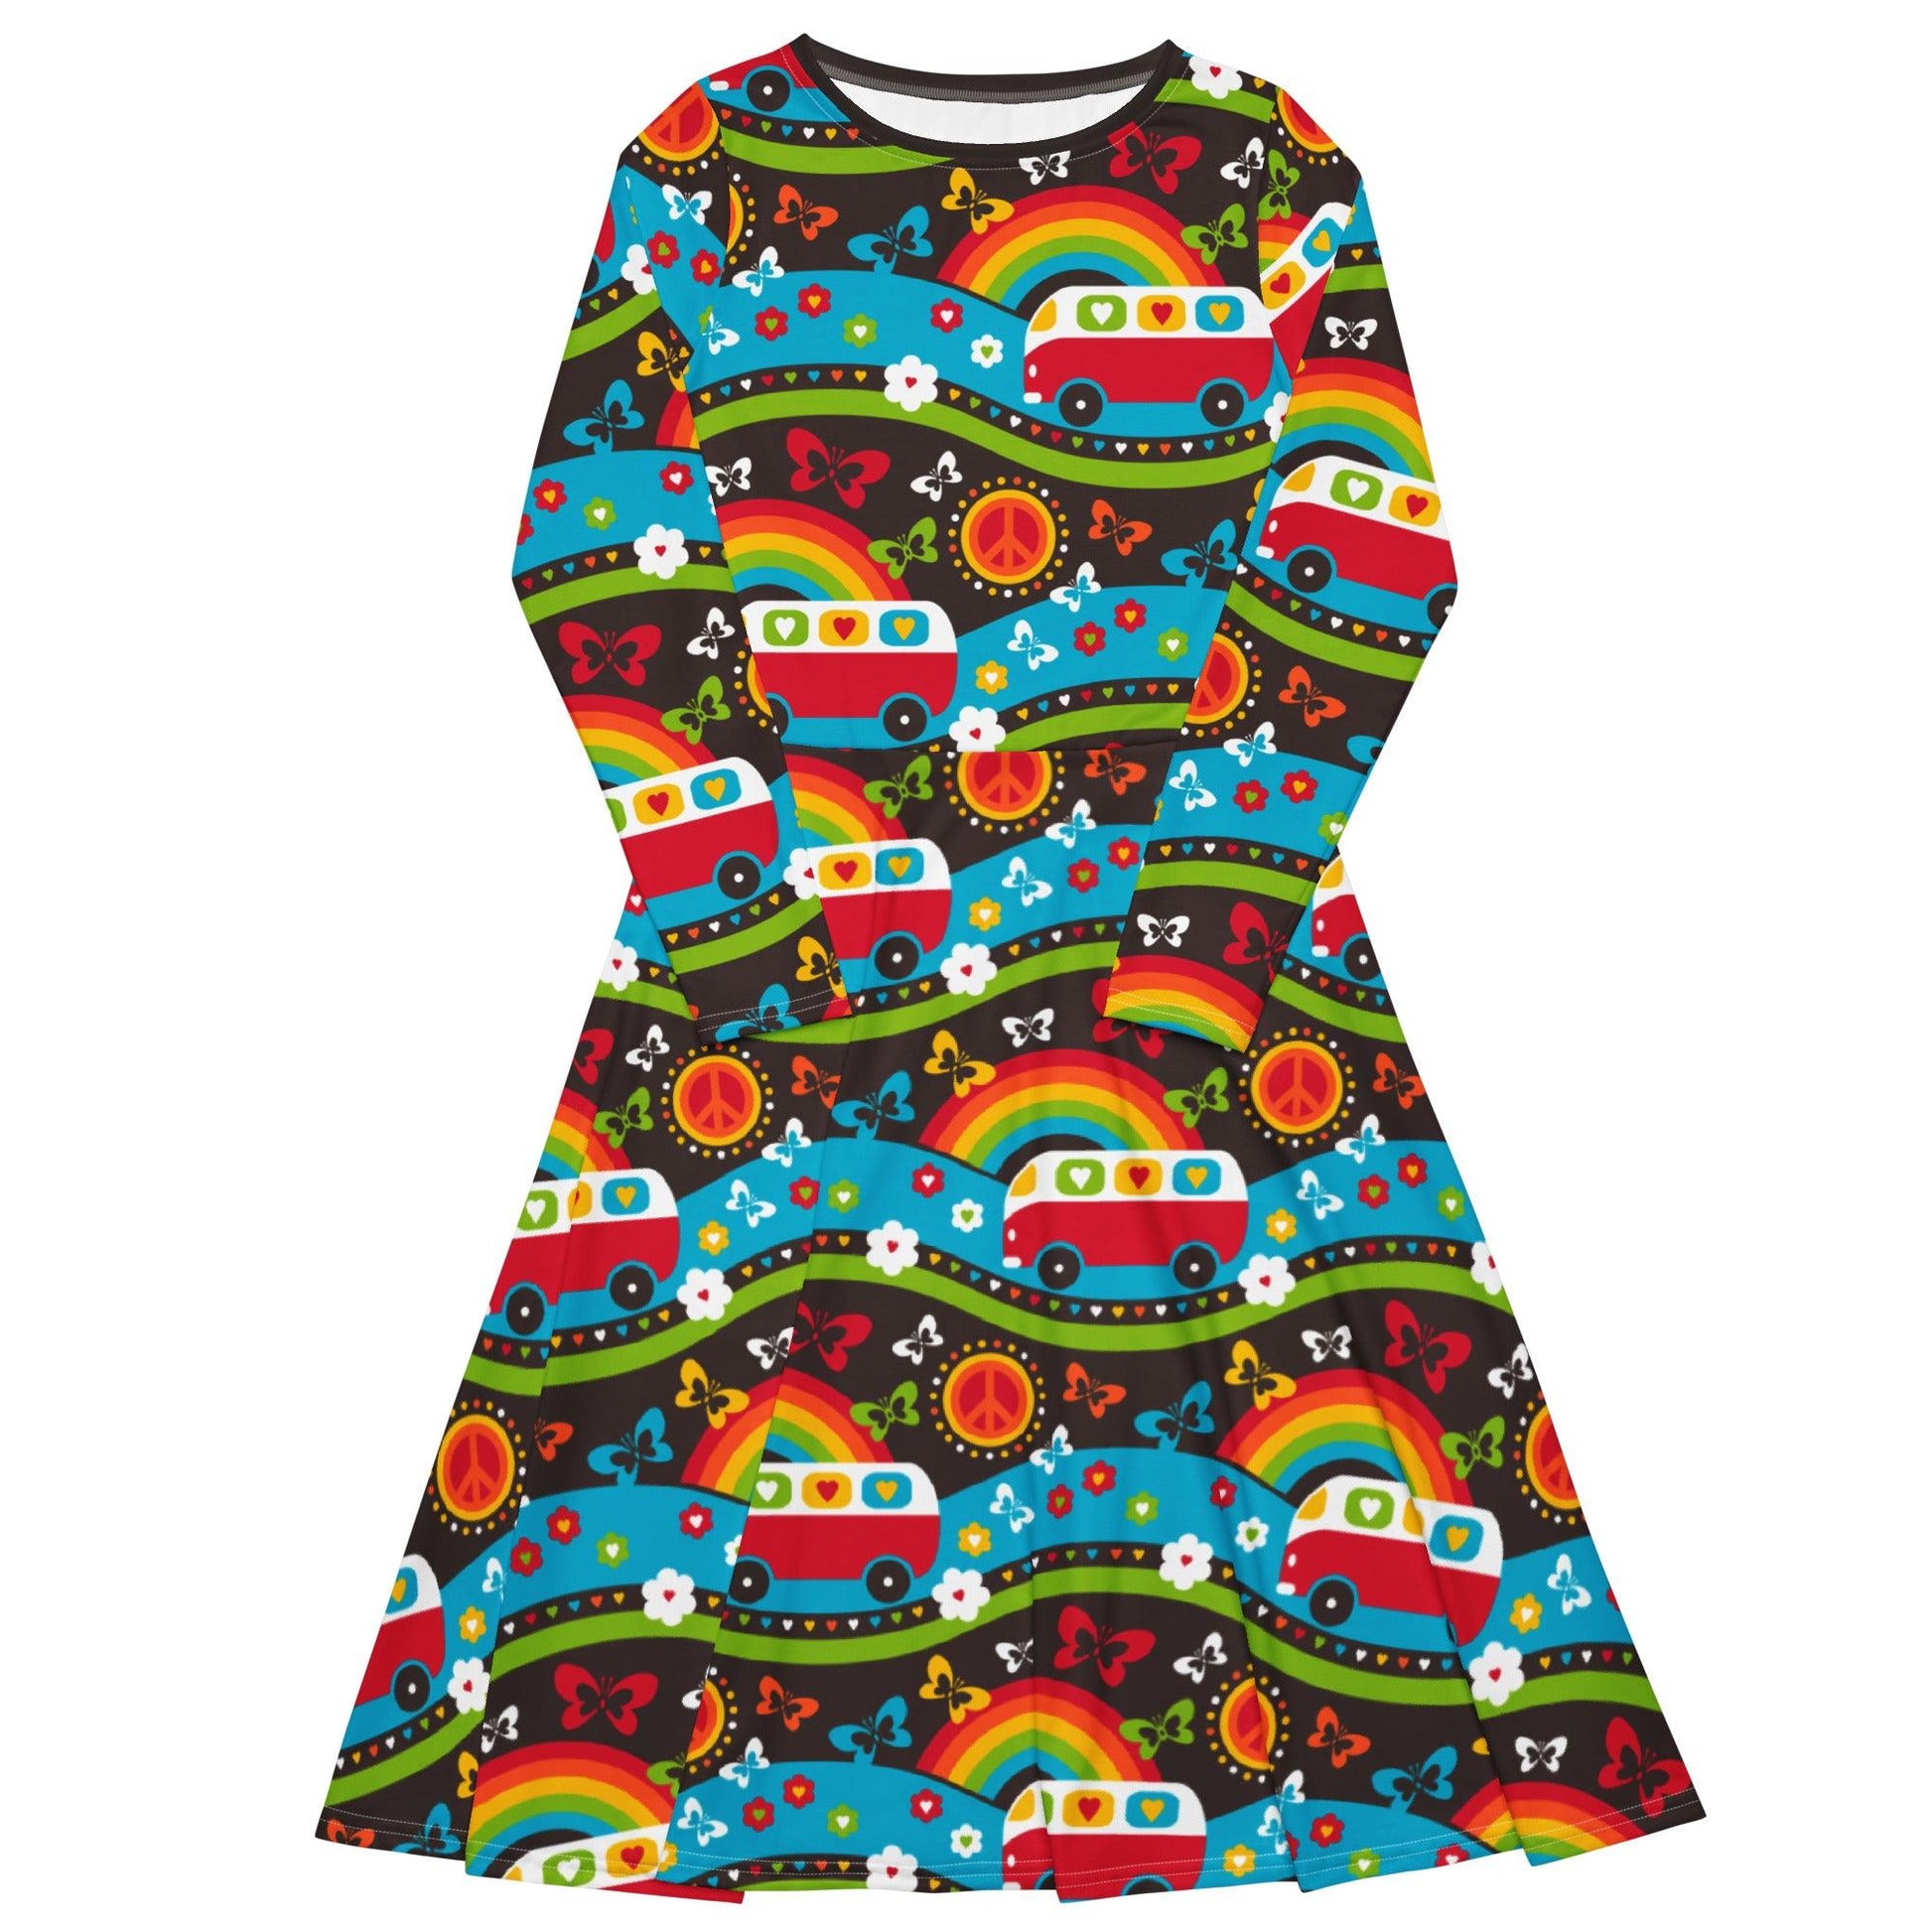 HIPPIE DAY rainbow - Midi dress with long sleeves and handy pockets